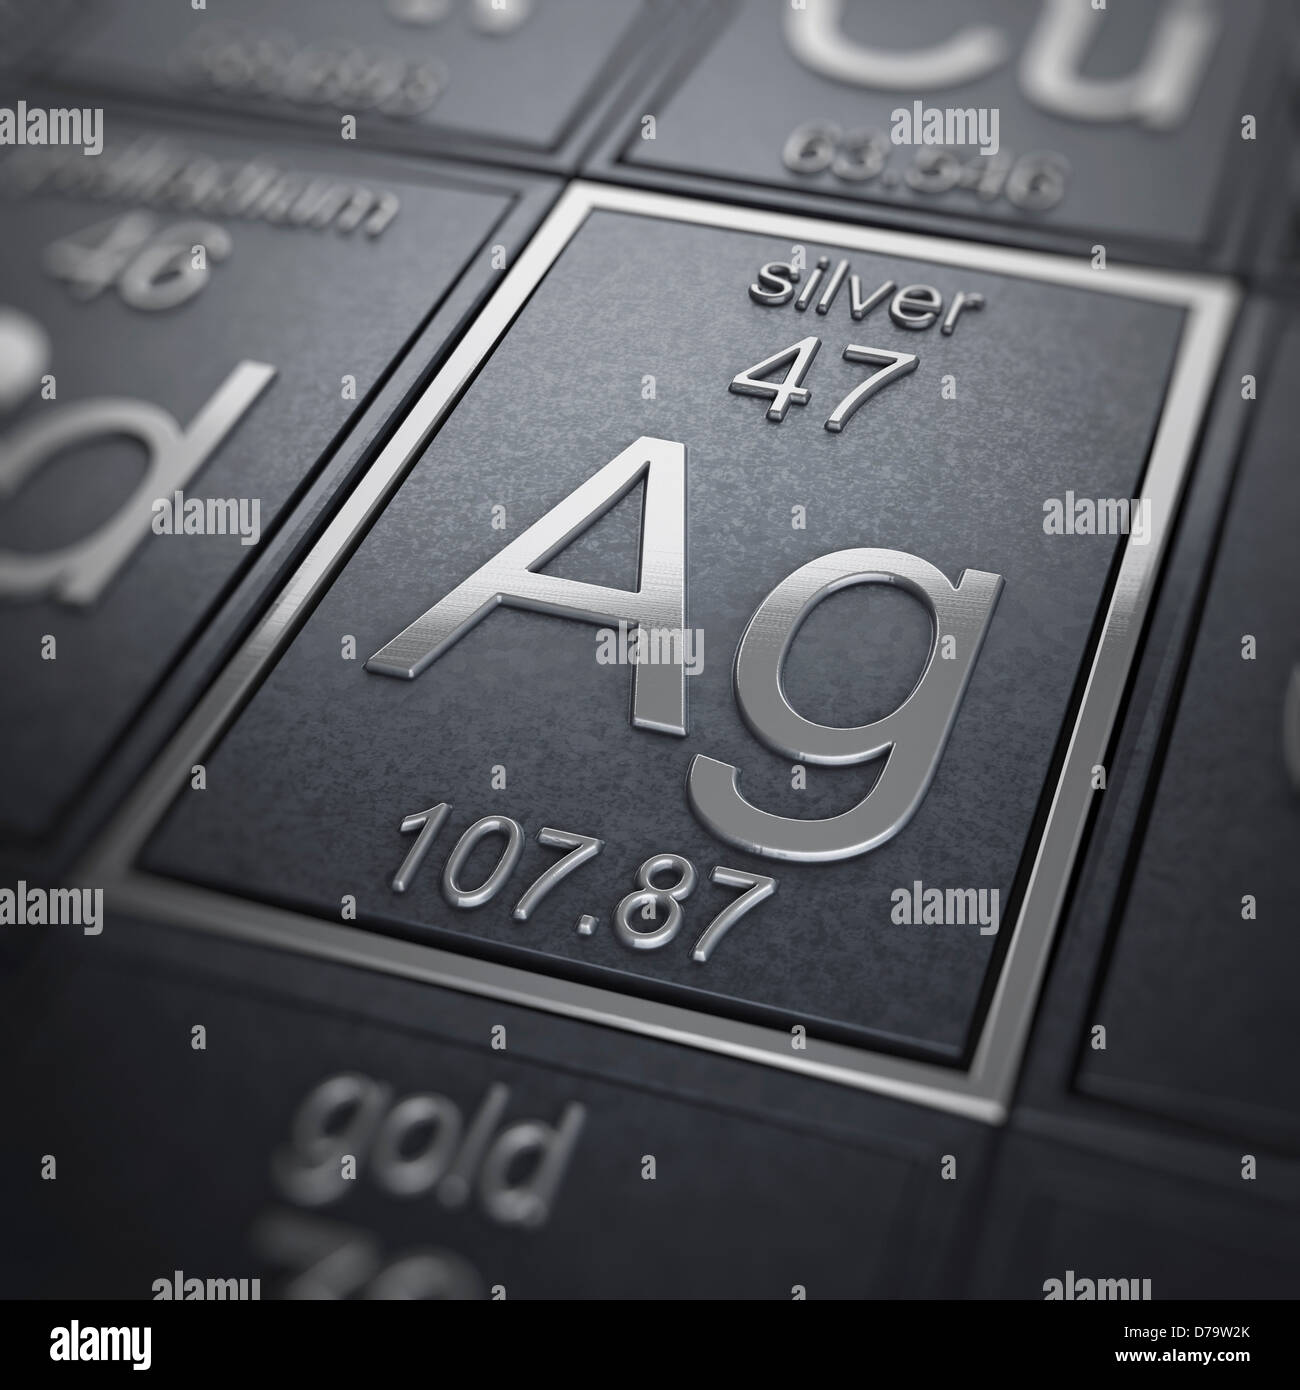 Silver Chemical Element) Stock Photo